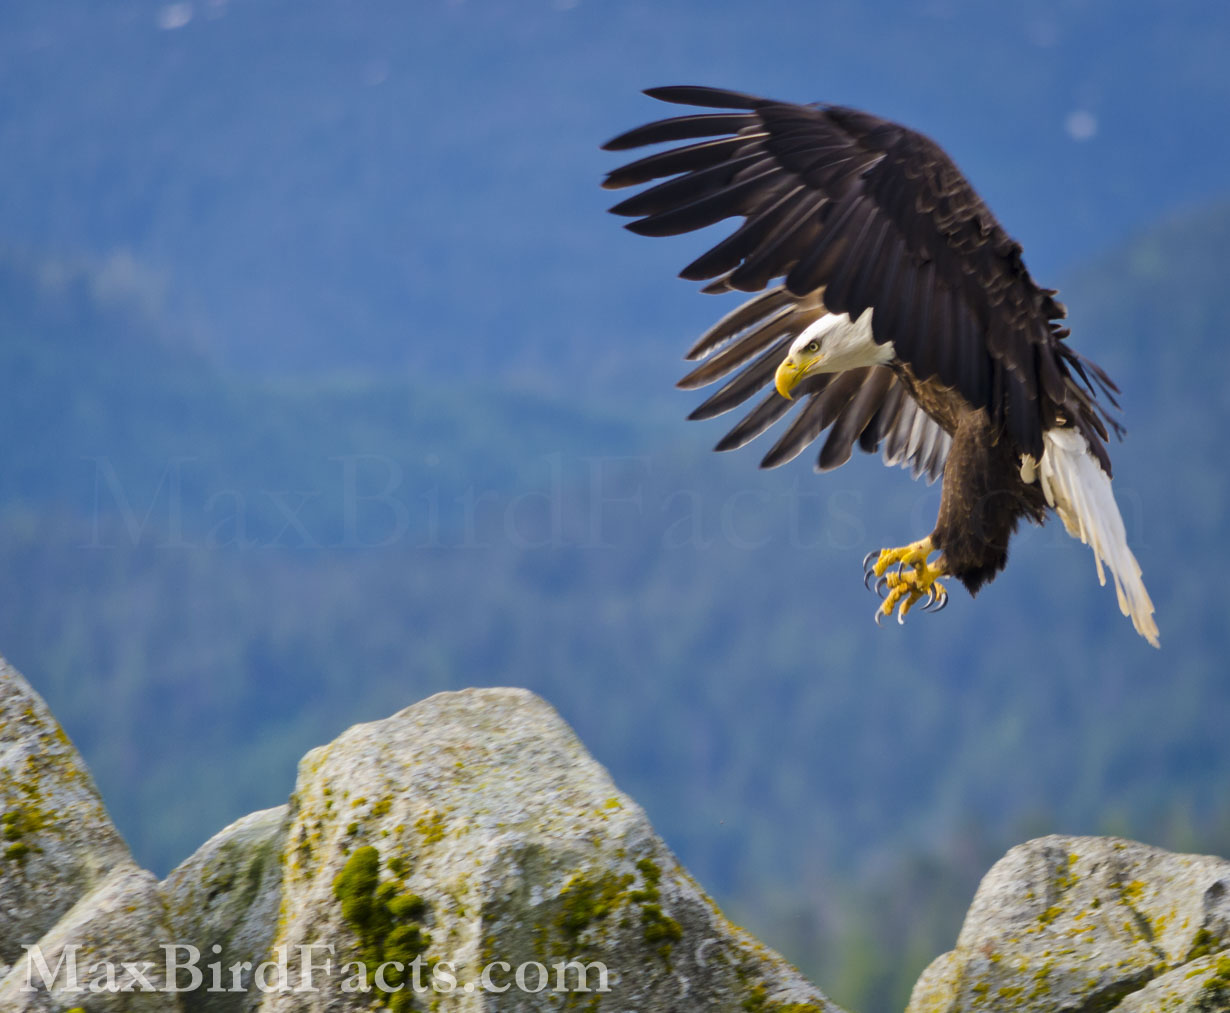 Bald Eagles are formidable predators, but they are still animals. It isn’t fair to assess this species as a bully or “of poor moral character” when all it’s doing is surviving the way it knows how. And if they can take a break and have some fun tossing a stick around, why not? (Ketchikan, AK. 2013)